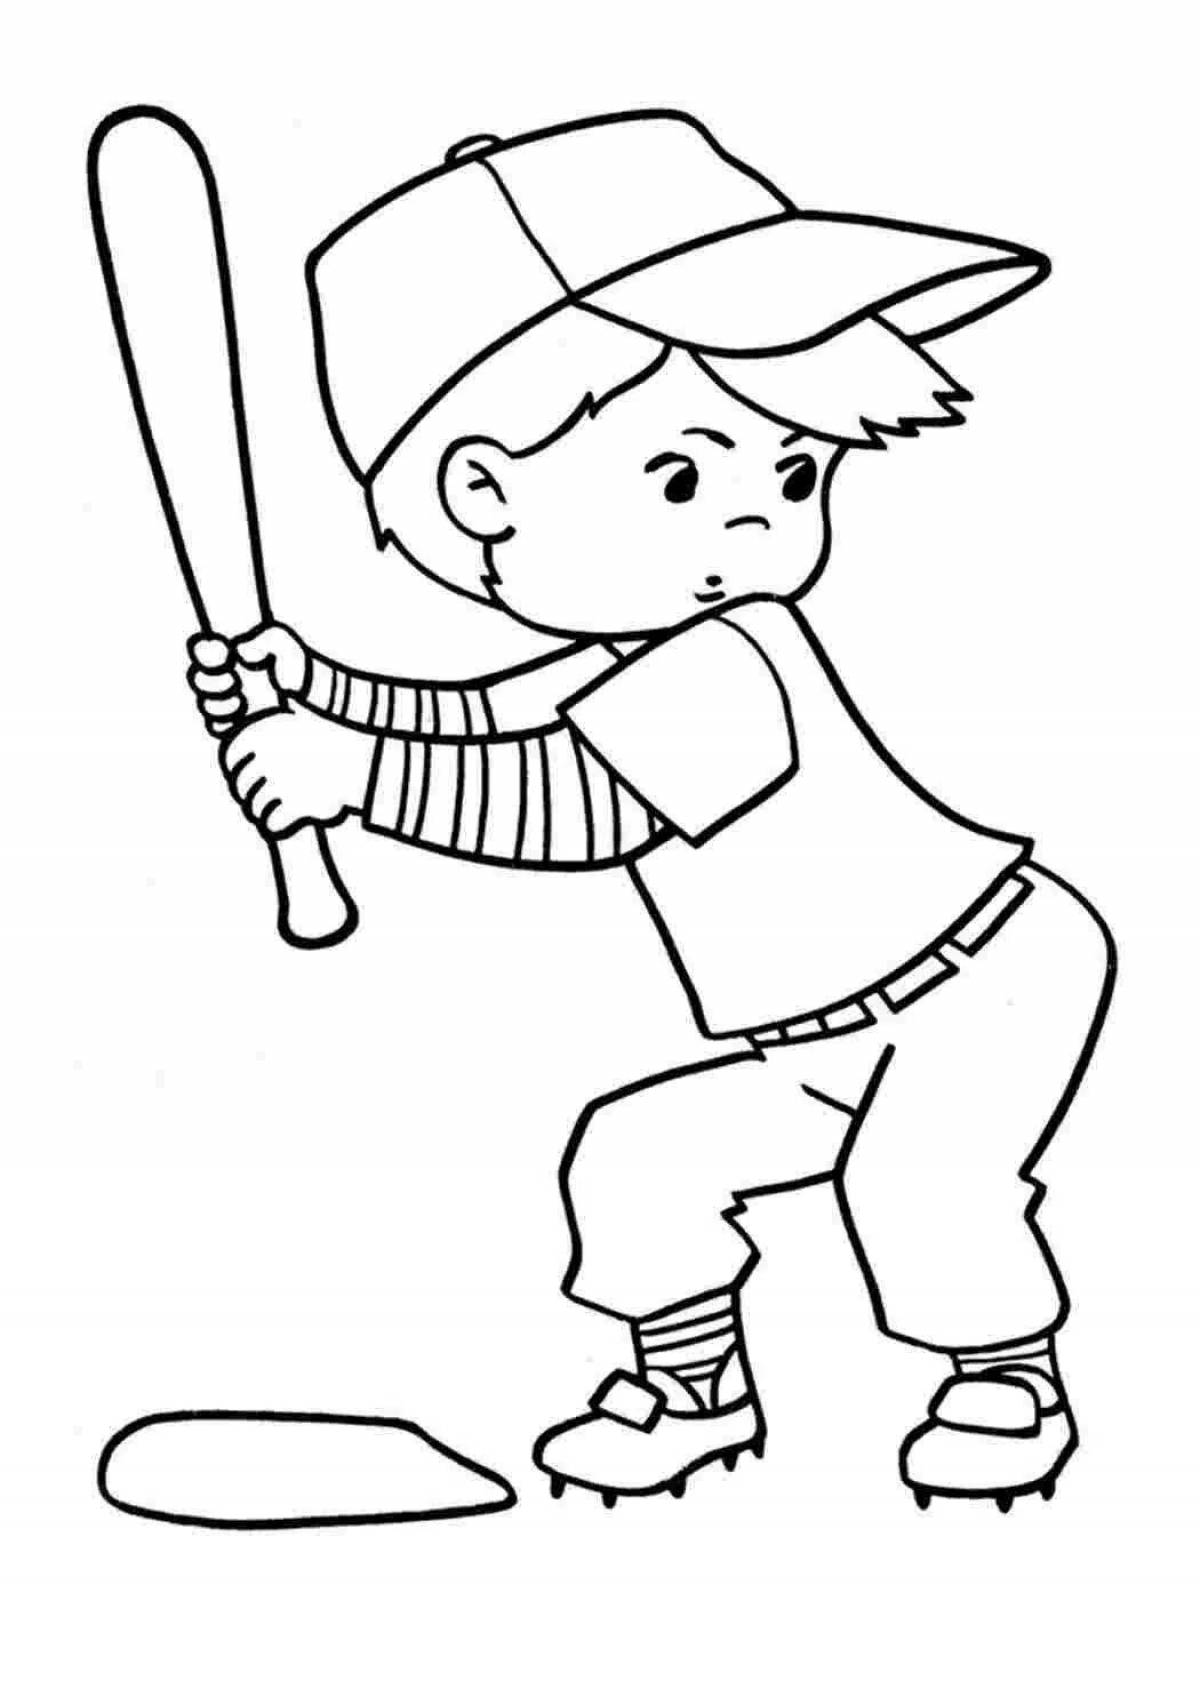 Fun sports coloring pages for 3-4 year olds